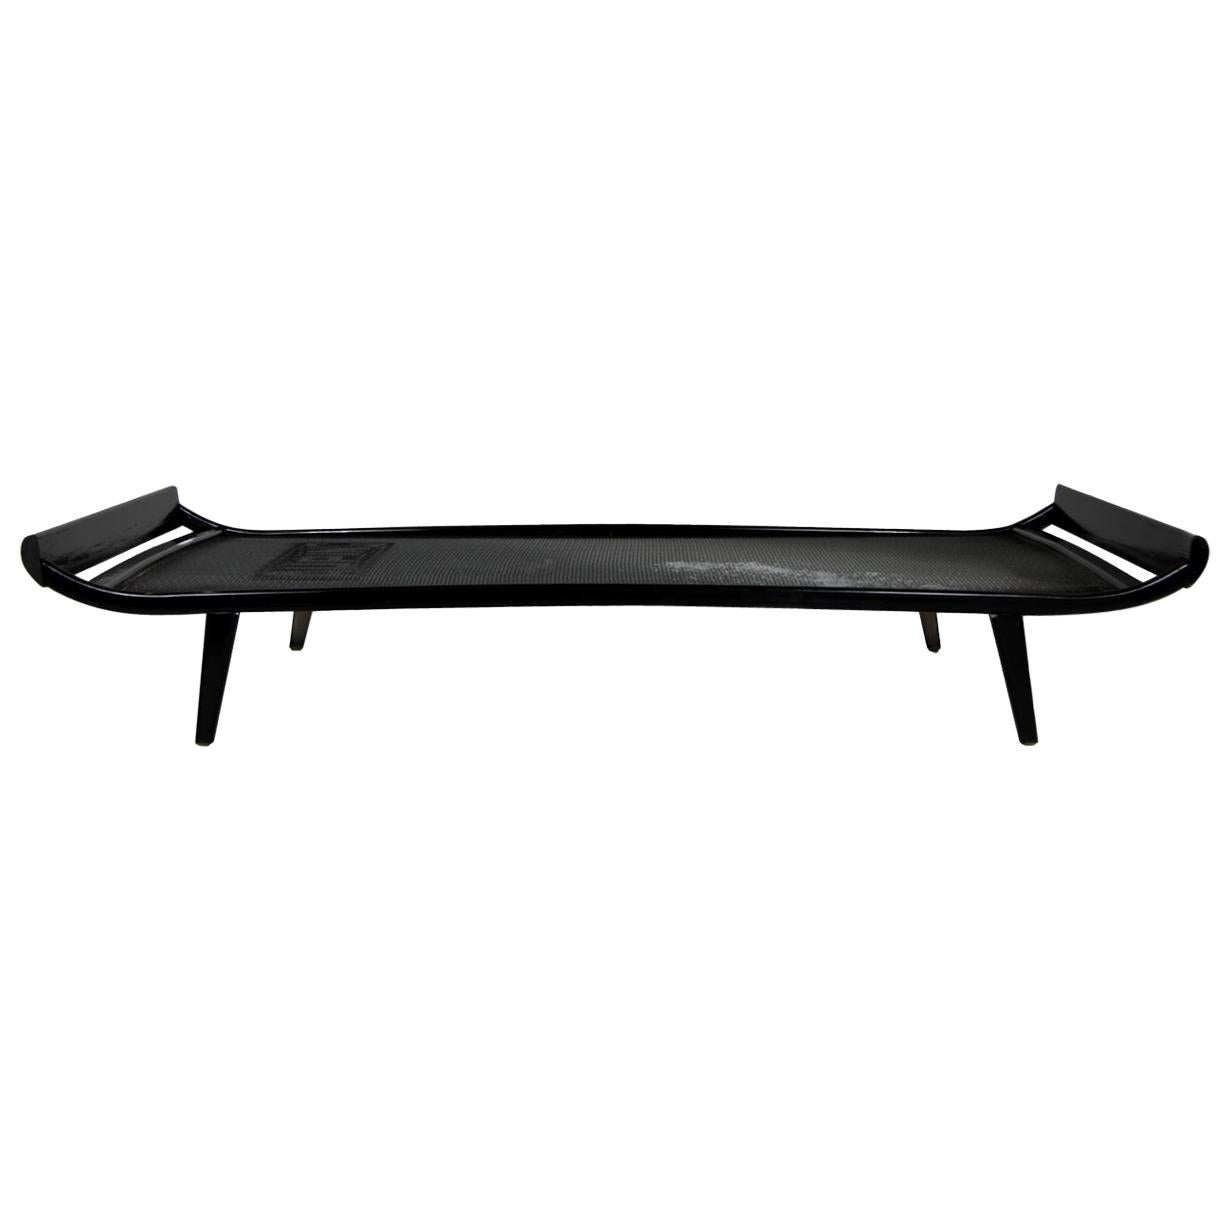 Dick Cordemeijer Mid-Century Modern Metal Daybed Cleopatra, circa 1950 For Sale